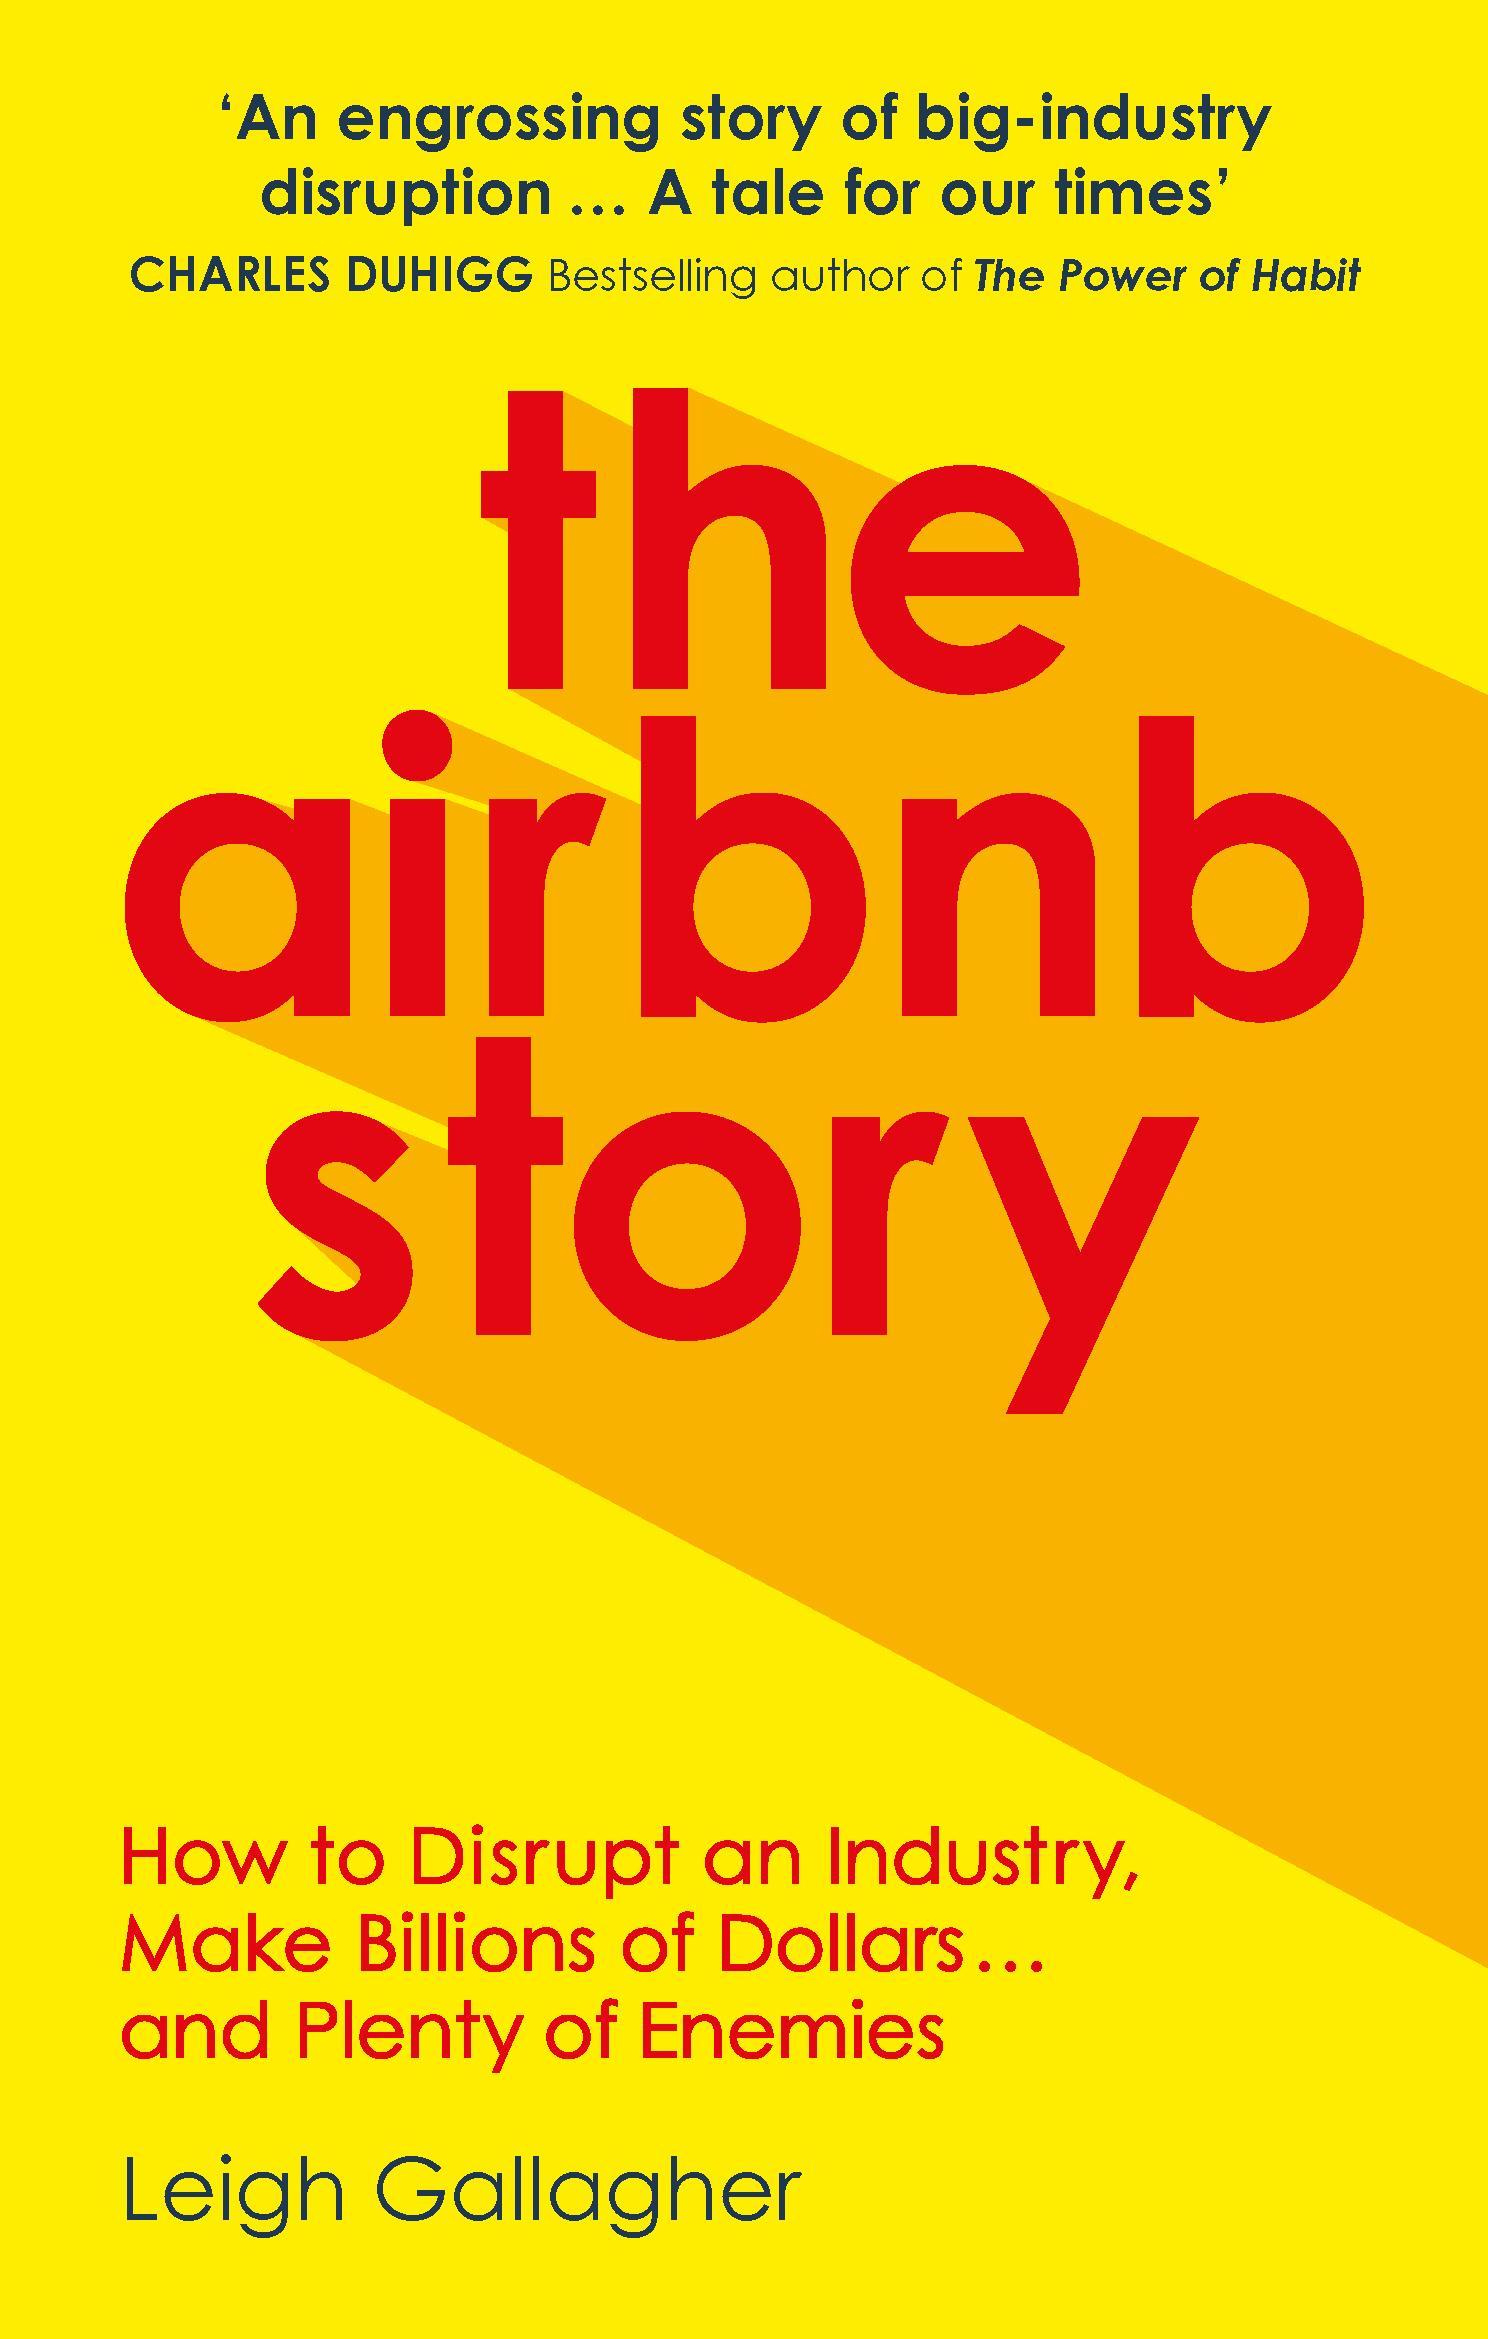 Airbnb Story - Leigh Gallagher